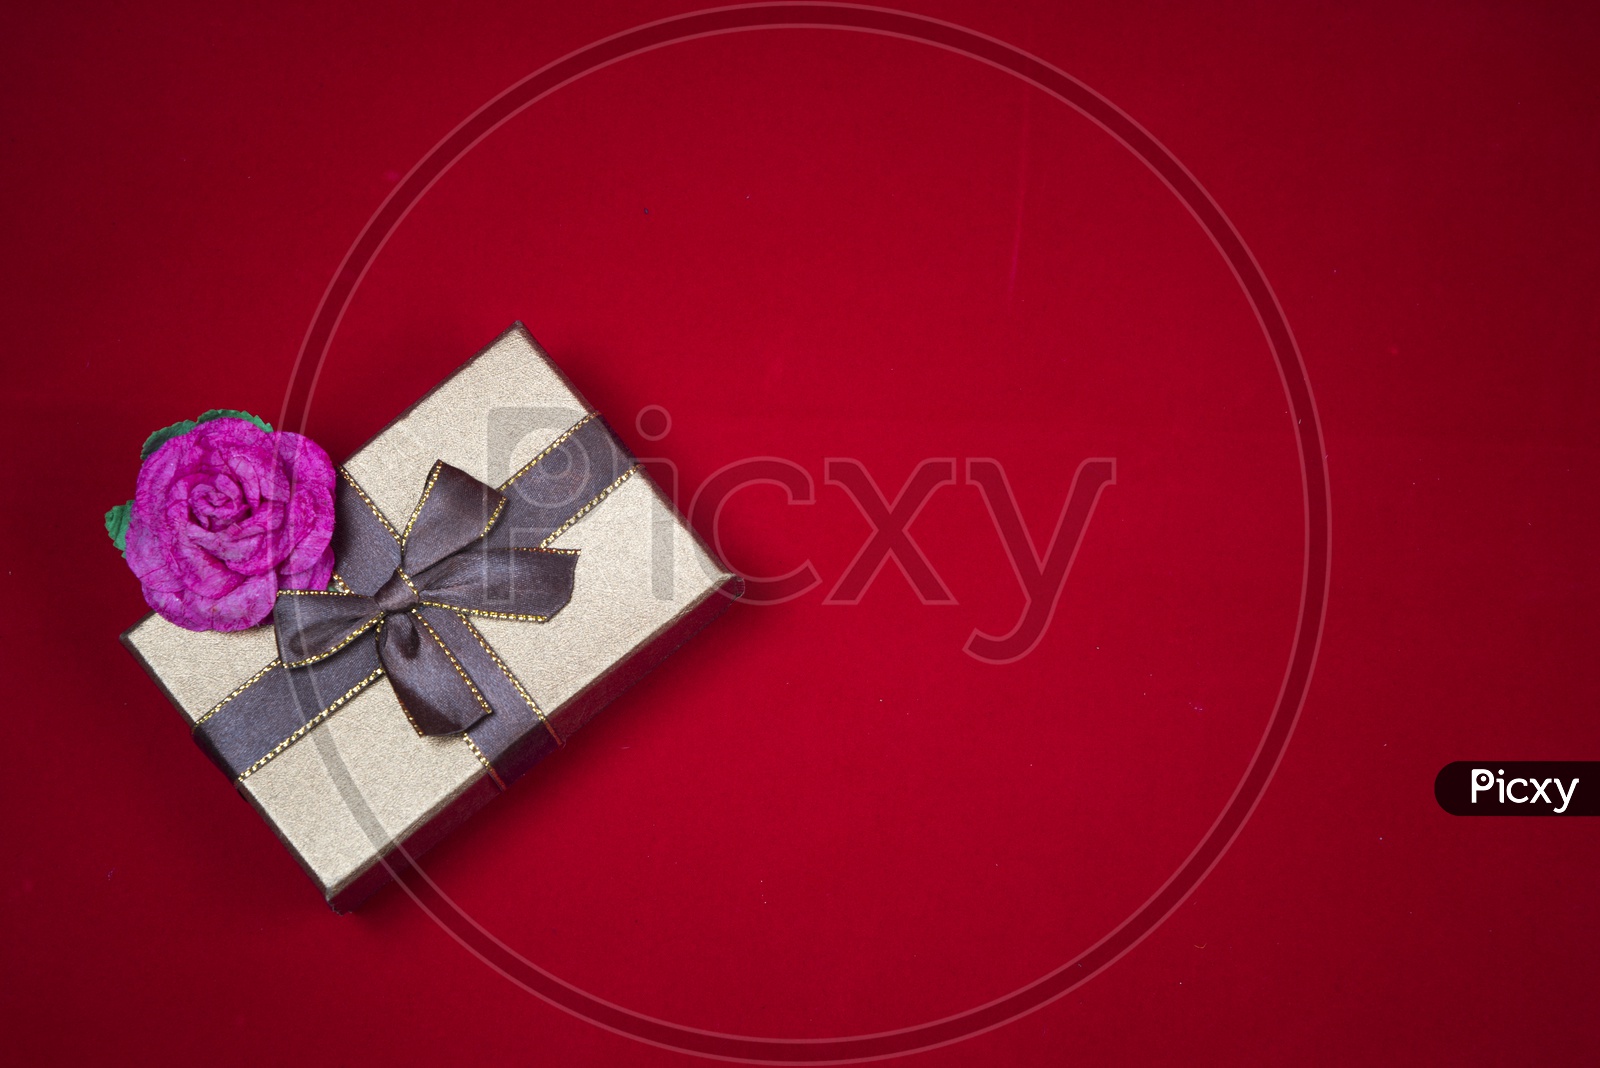 Gift box with a red rose on red background - abstract picture for Valentine day, vintage filter image